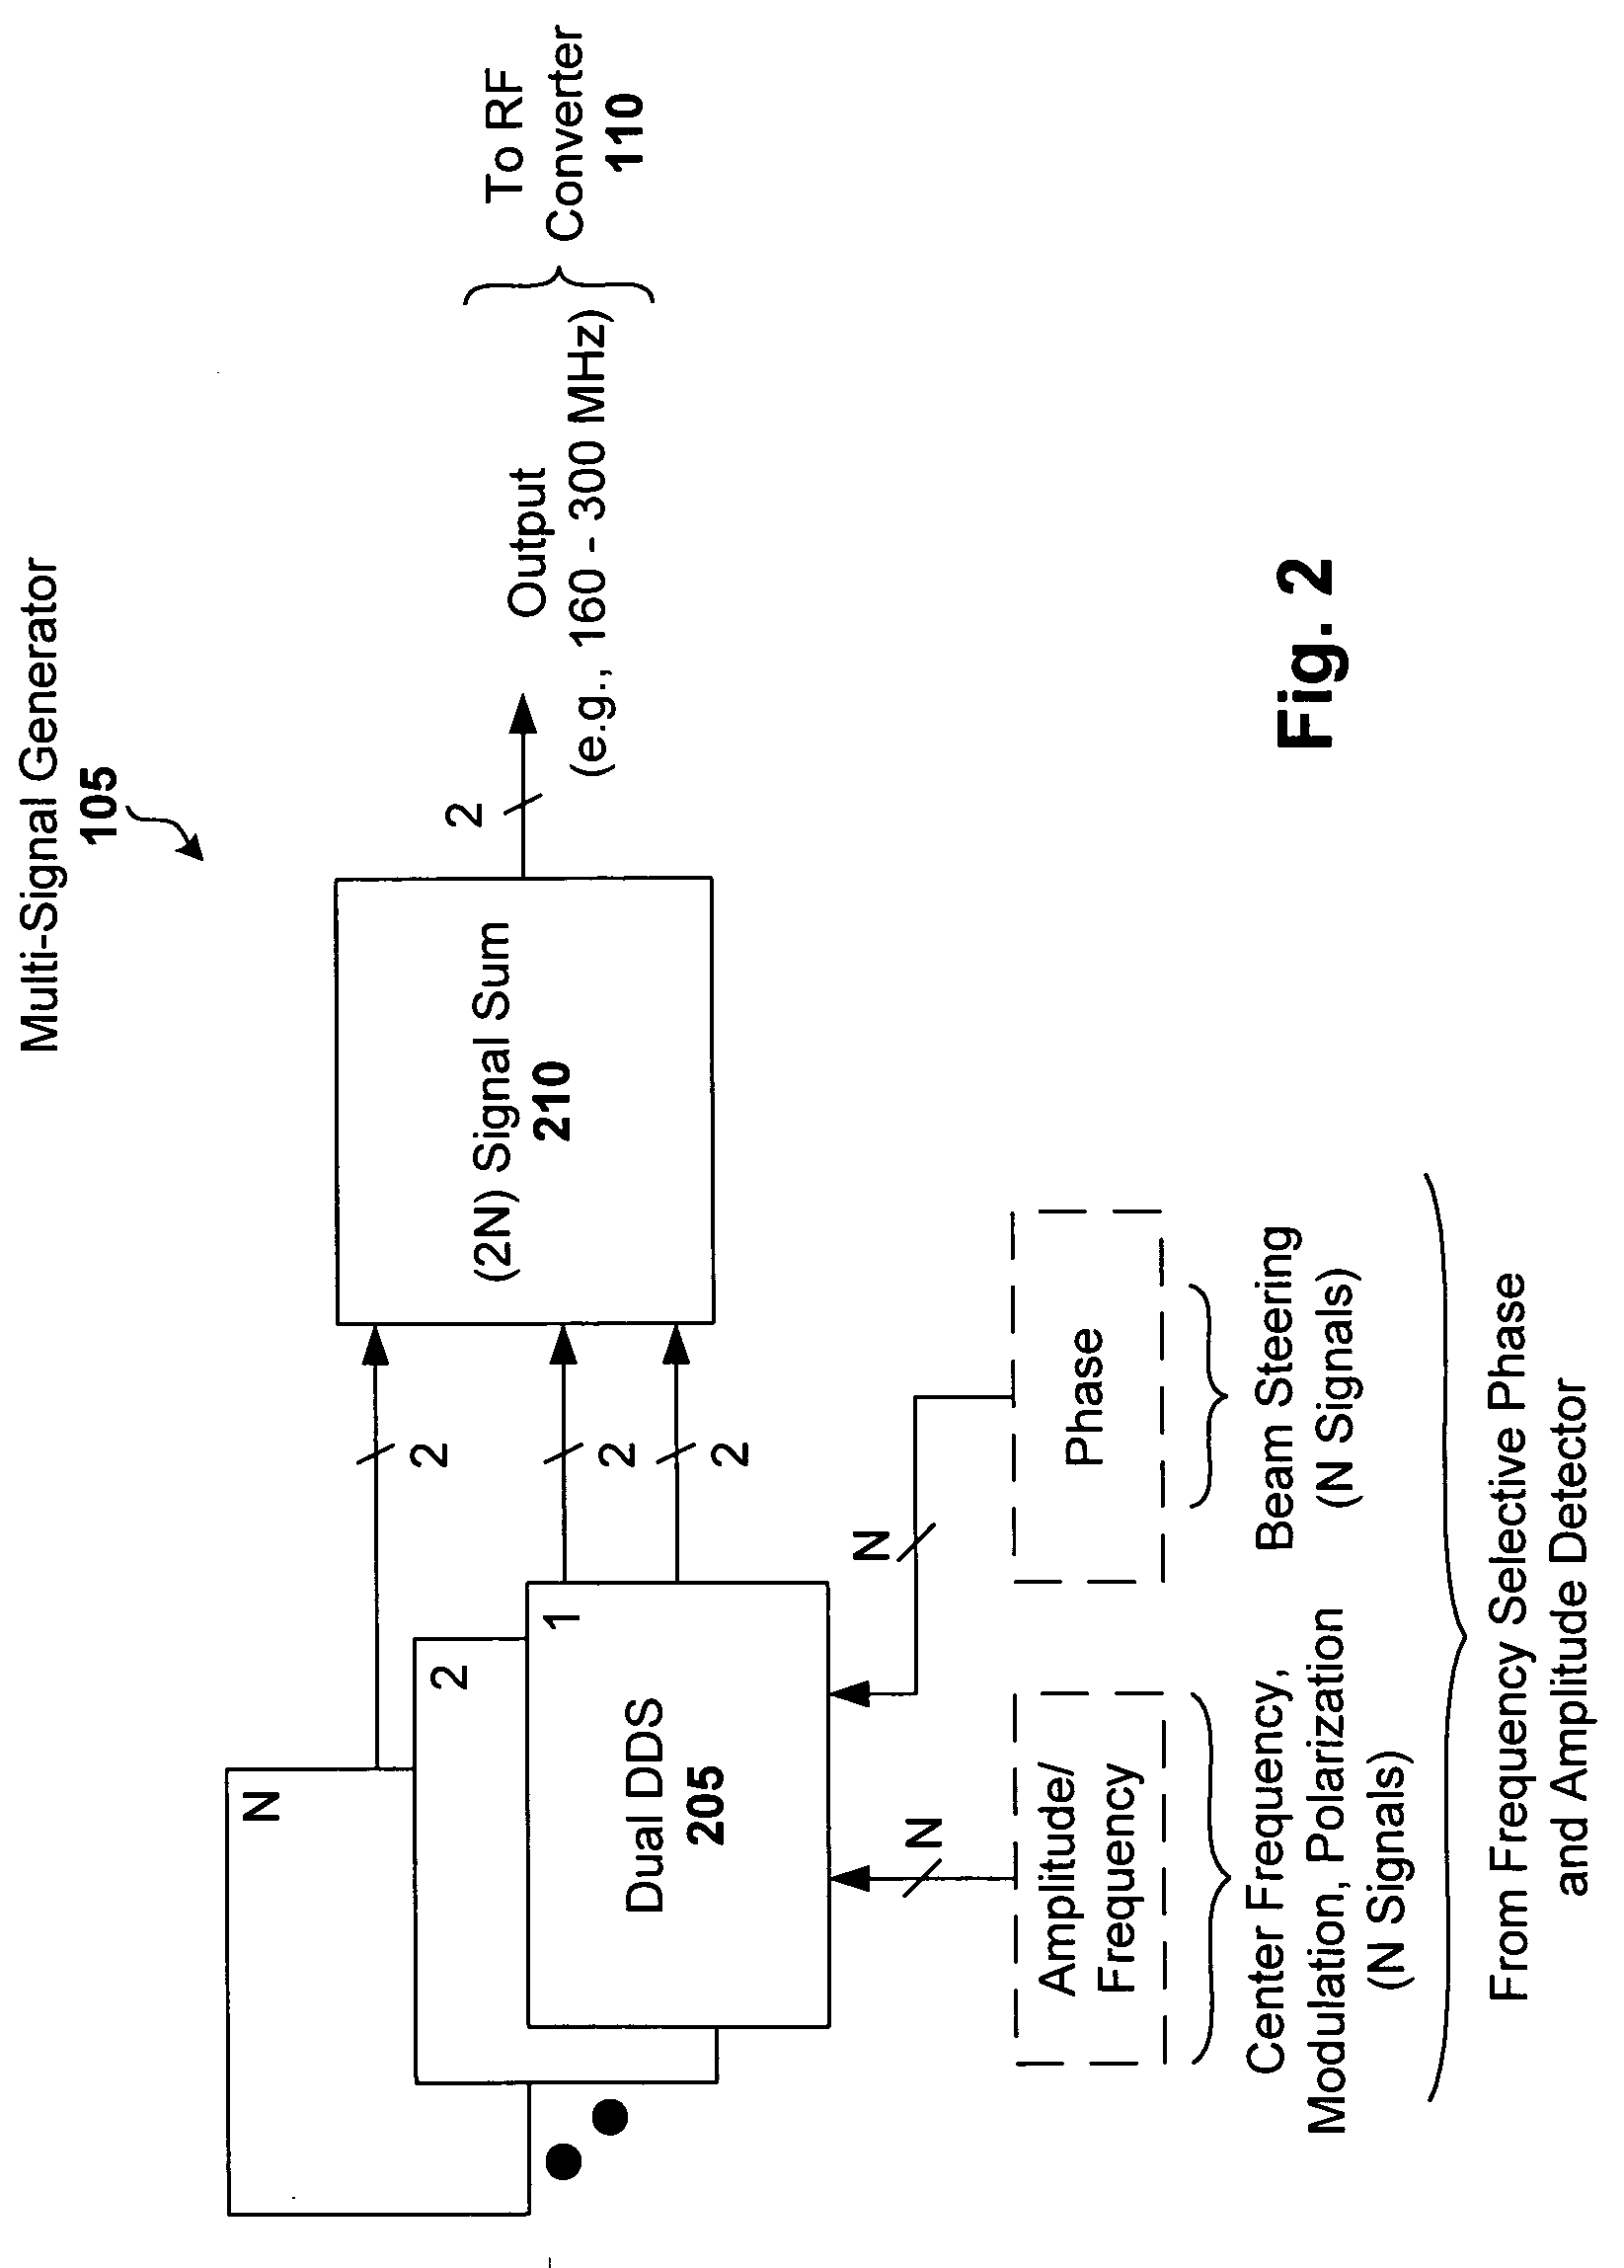 Distributed exciter in phased array